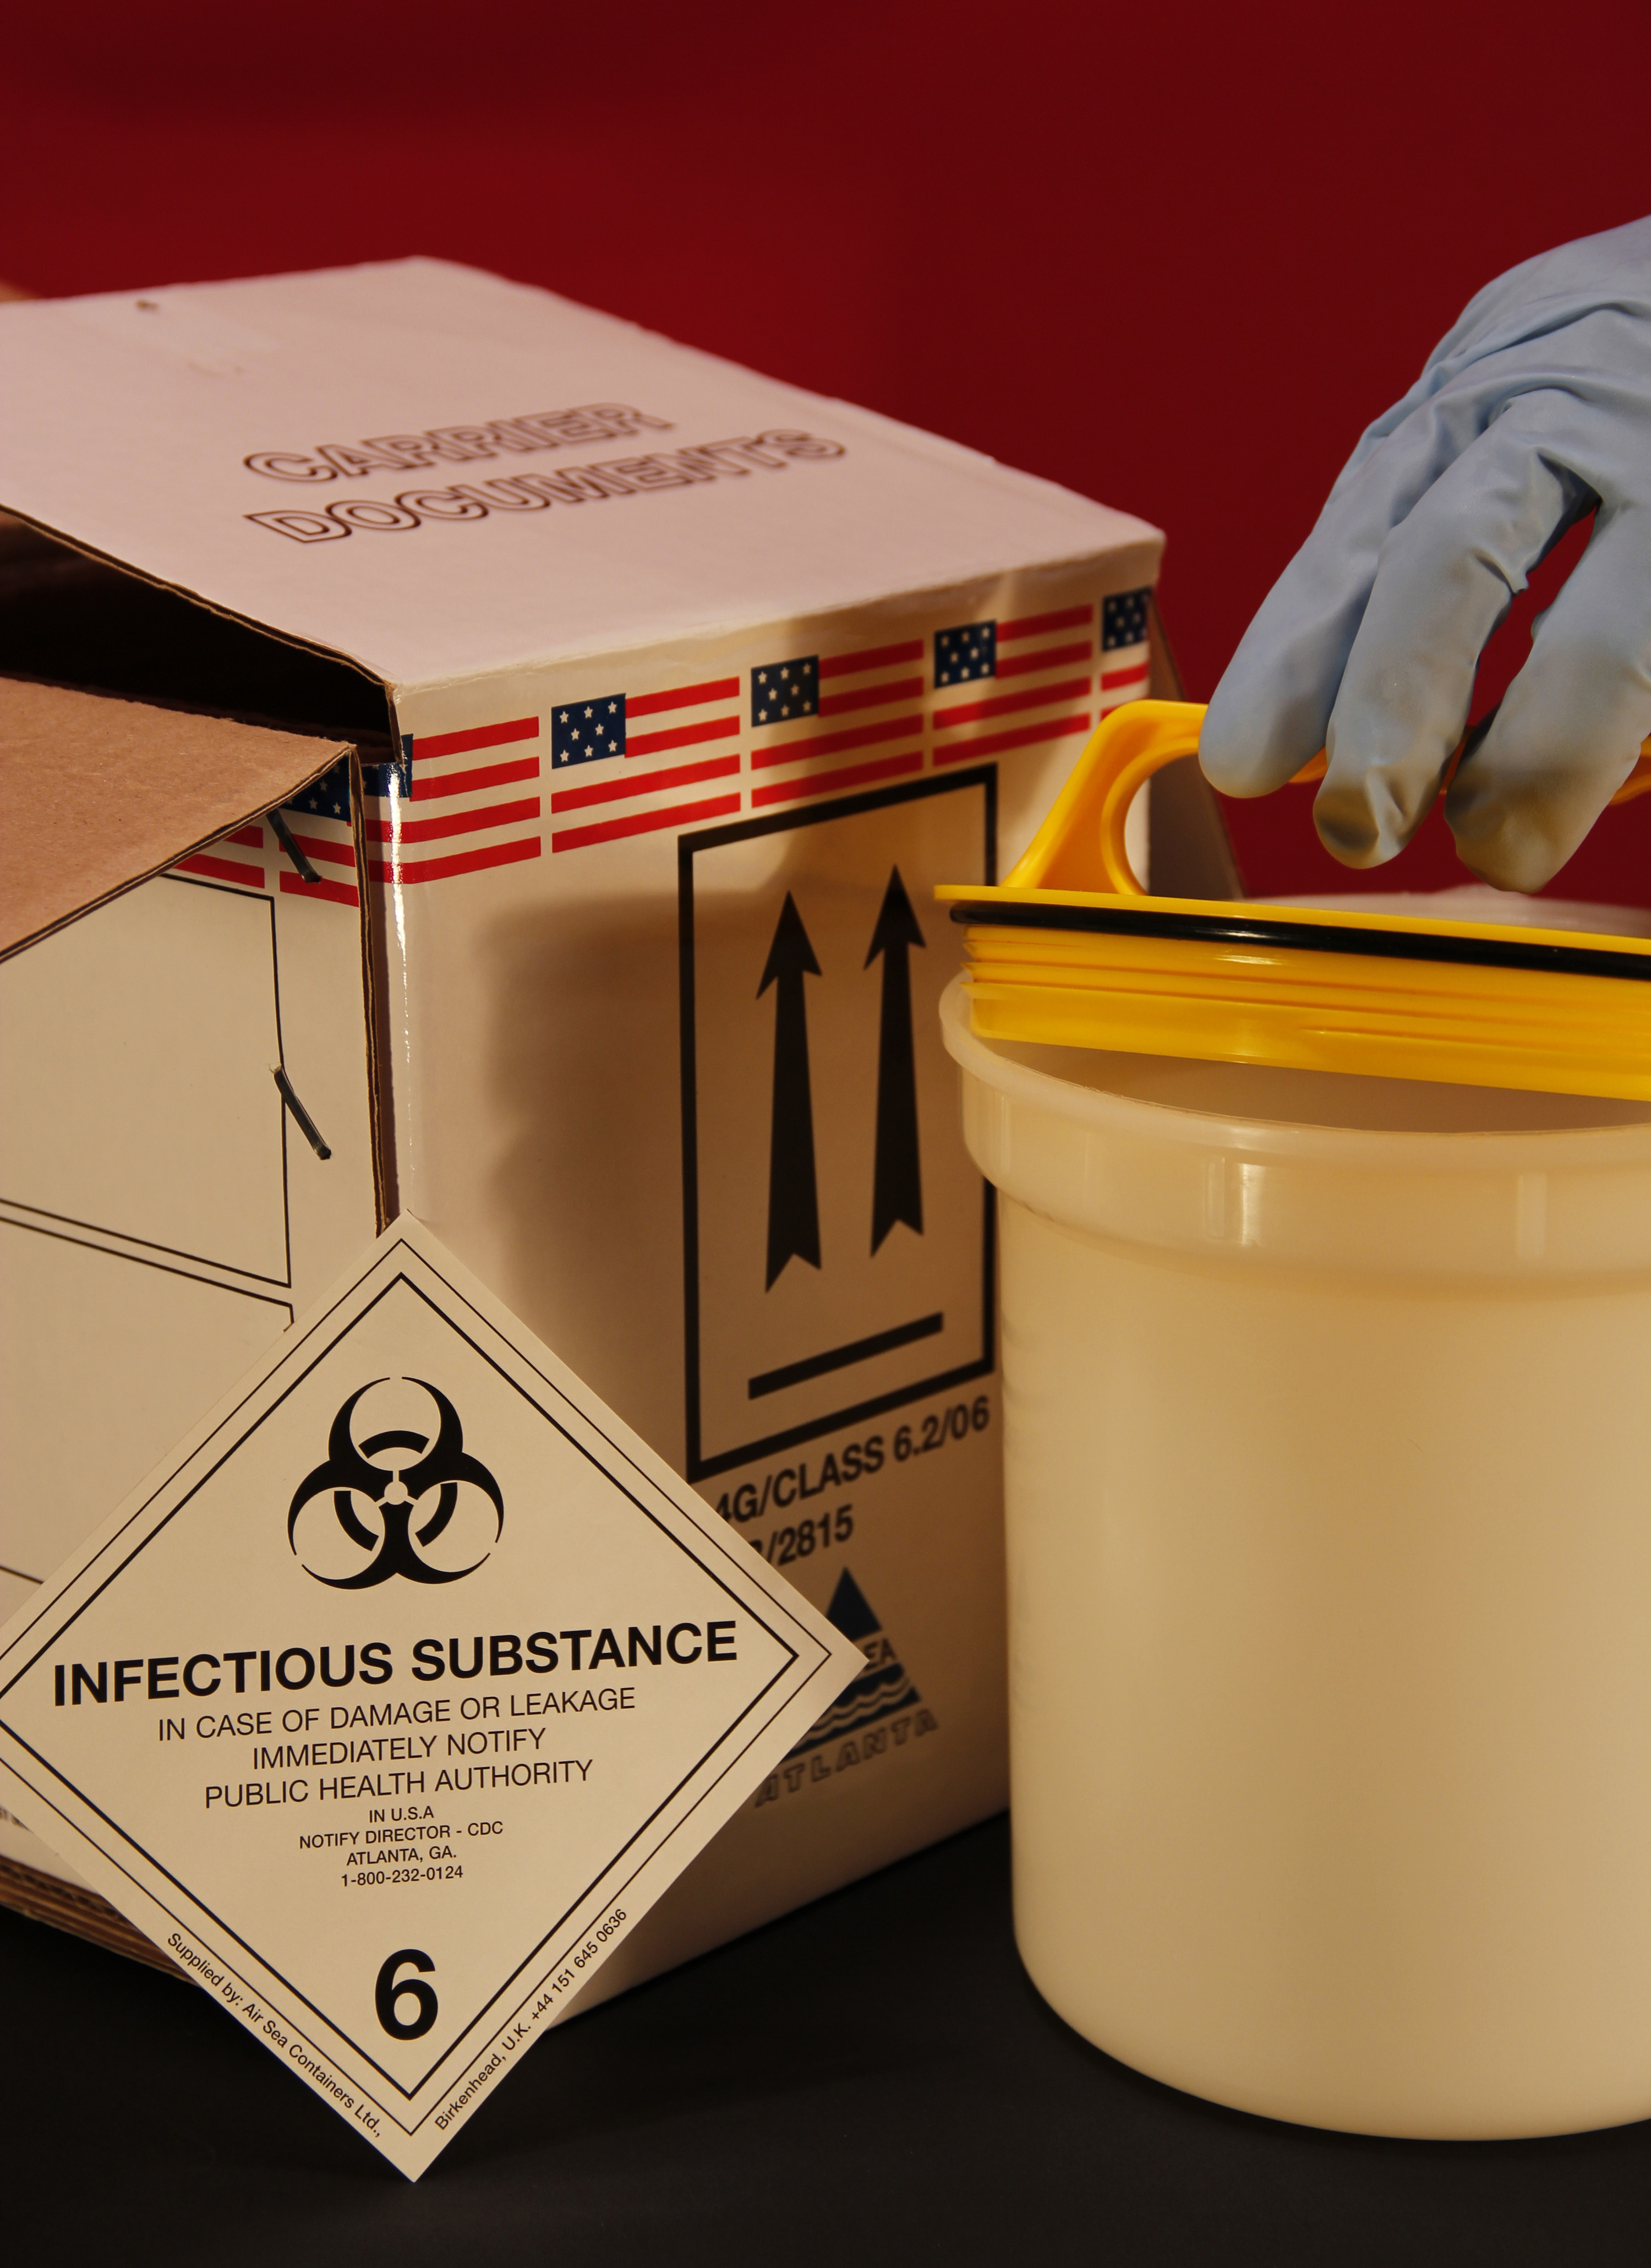 A Gloved Hand Opening A Biohazard Container